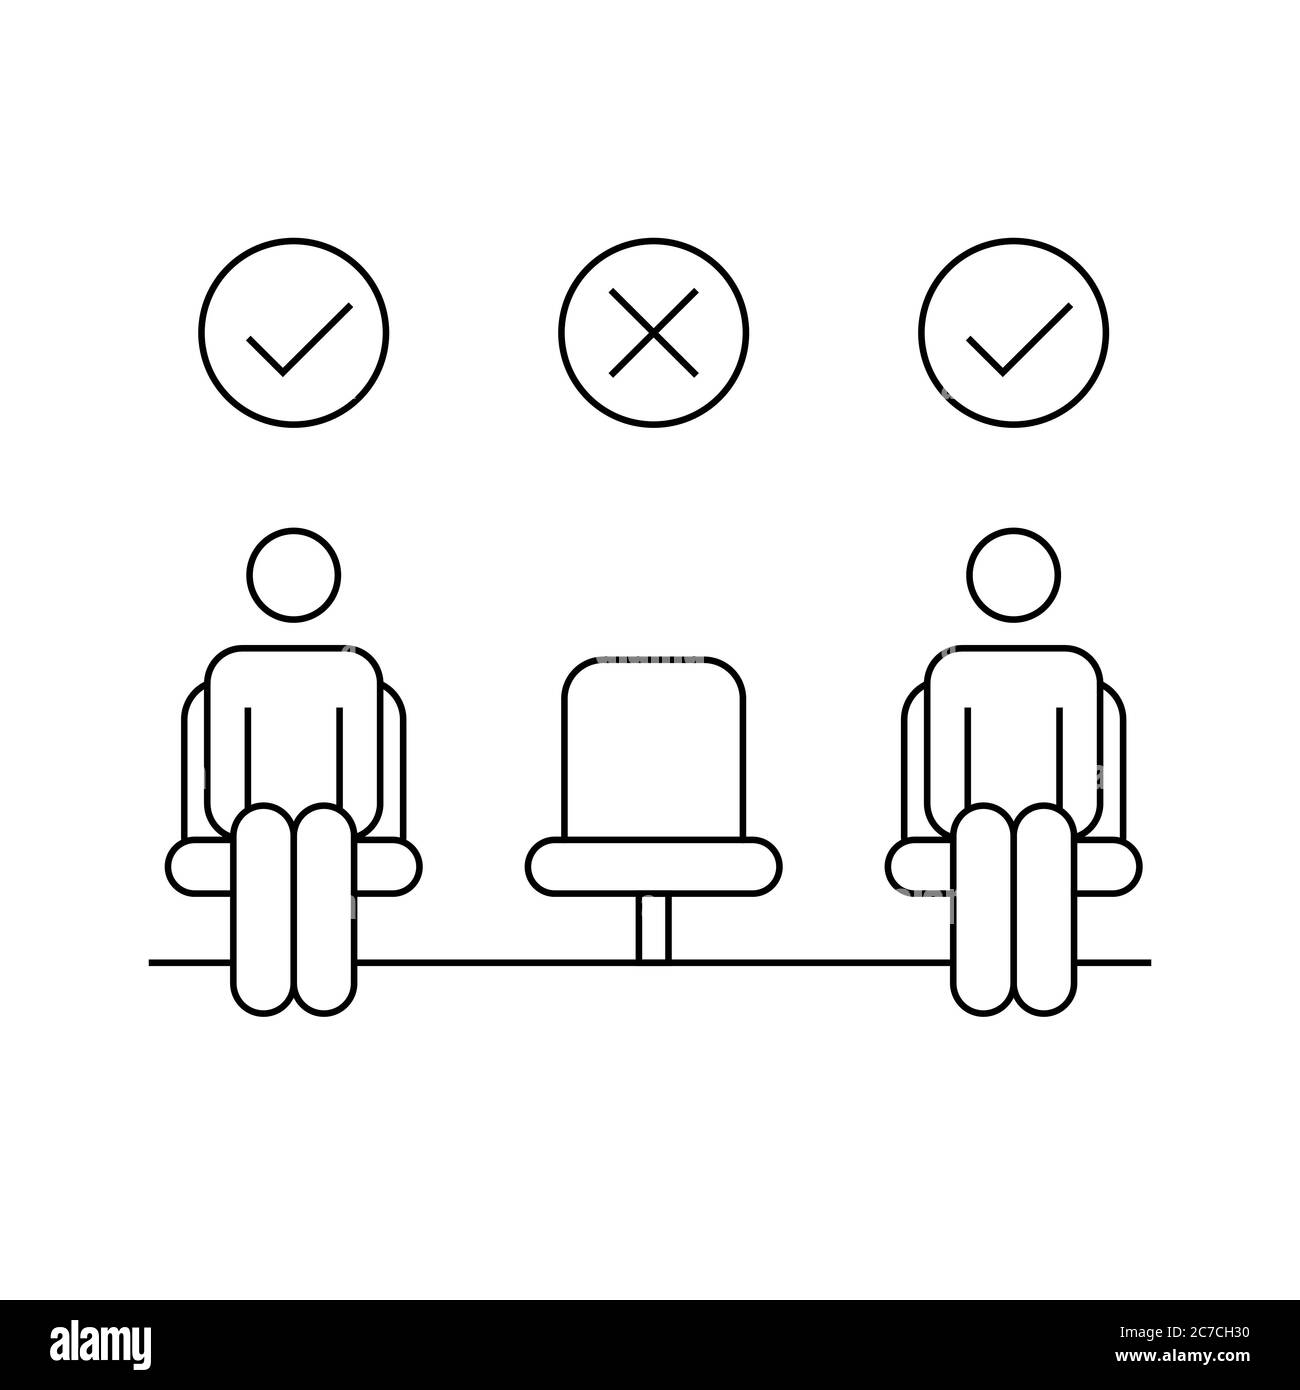 Movie theater reopen concept. Two men in seats with one empty chair. Social distancing in public places. Stick man line icon. Black outline on white Stock Vector